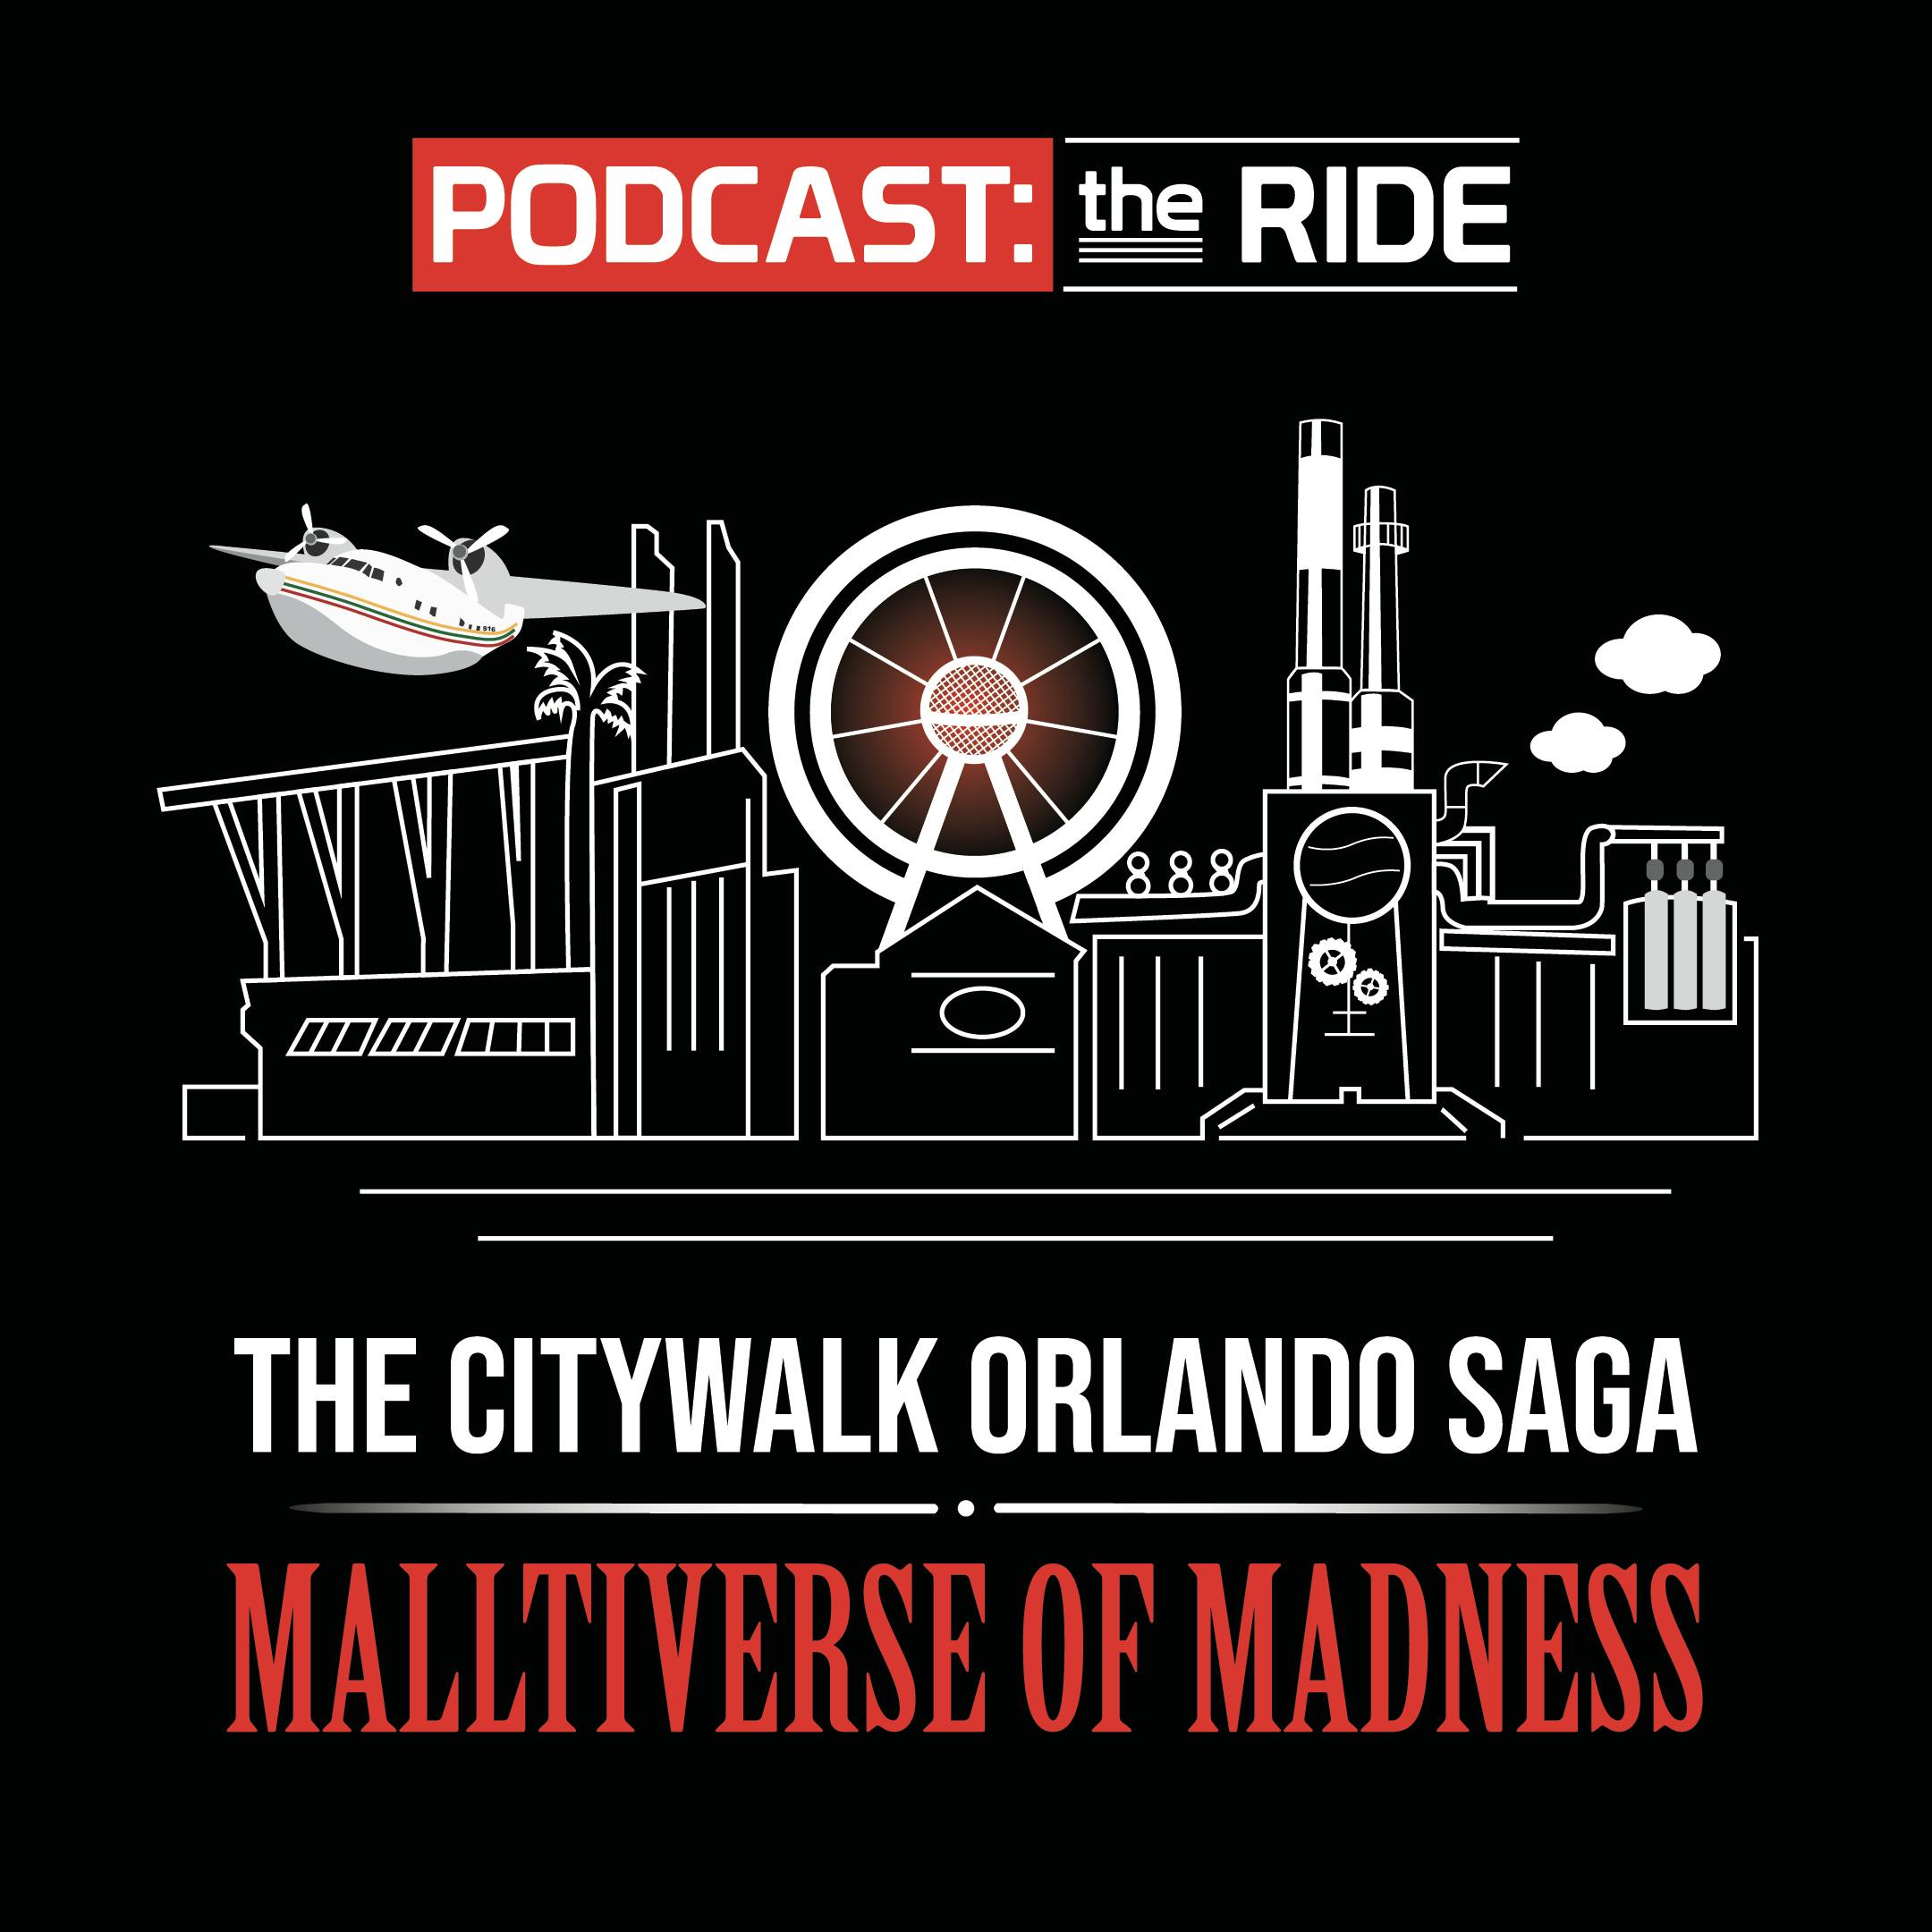 The CityWalk Orlando Saga: Malltiverse of Madness 7-3 with Nick Wiger and Kevin Tully